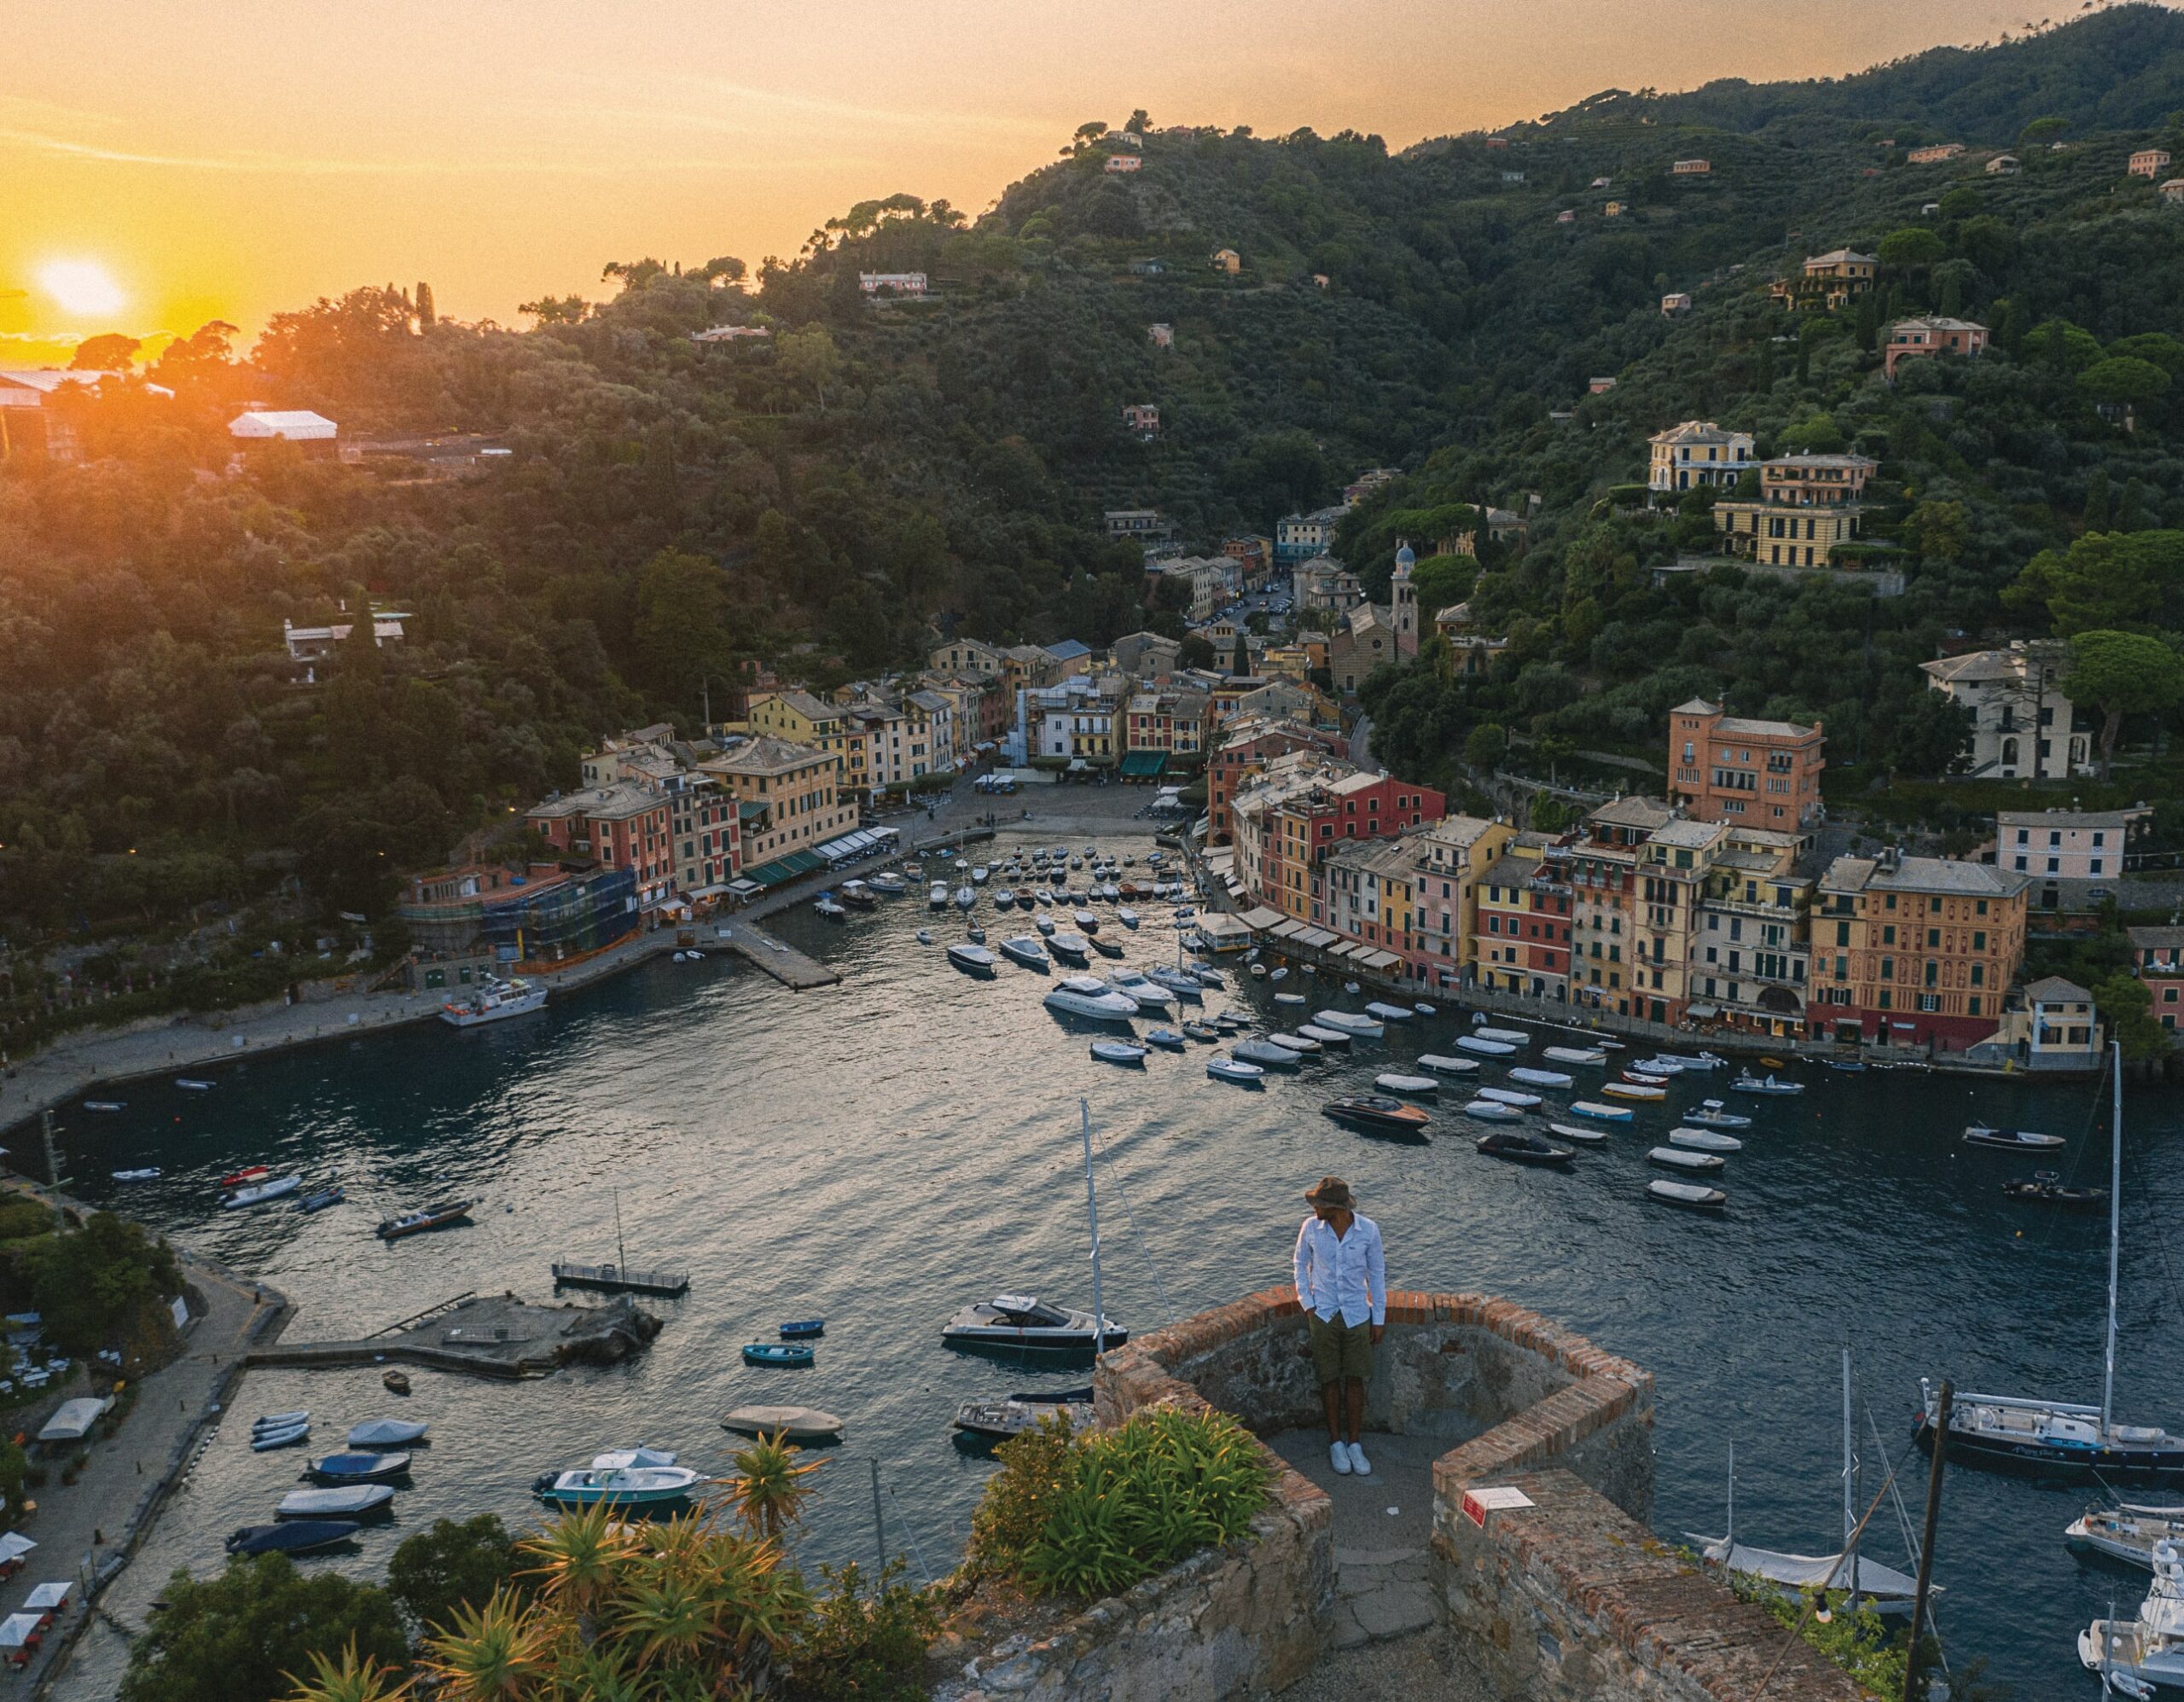 Go for a hike from Portifino along the coast for beautiful views of the Italian Riviera and the sea. (Photo Credit: Splendido Mare)